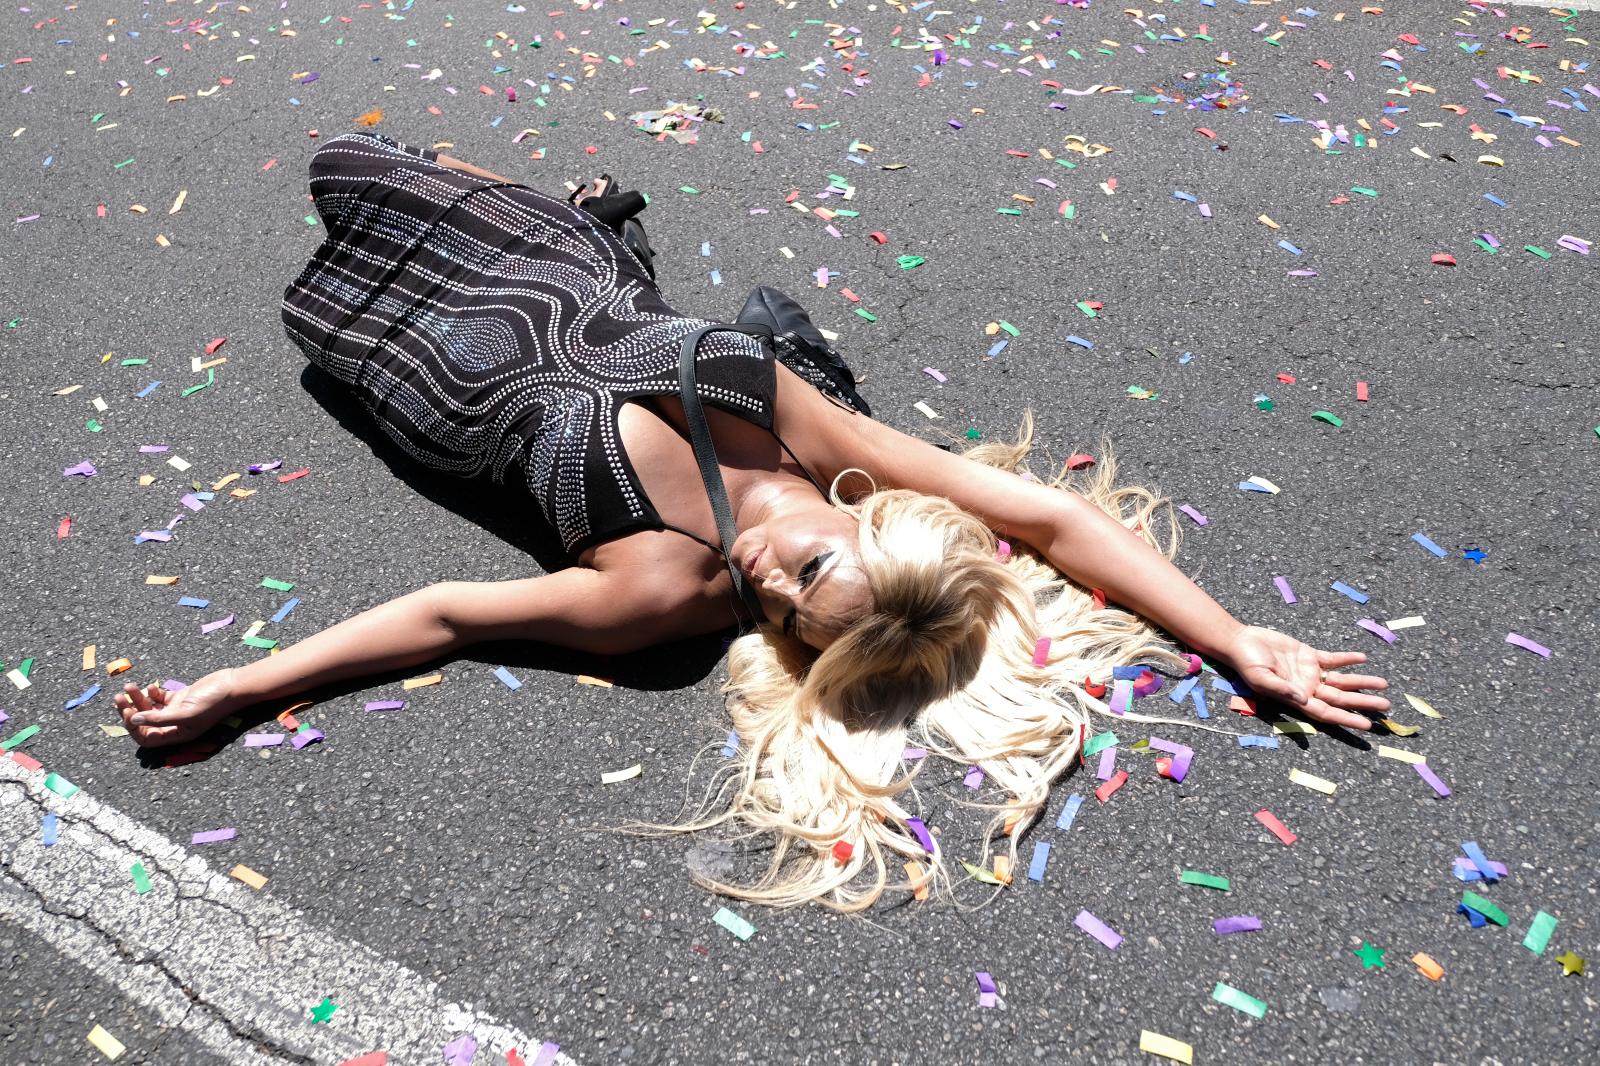 Image from REPORTAGE - WEST HOLLYWOOD, CALIFORNIA - JUNE 09: A performer lies in...